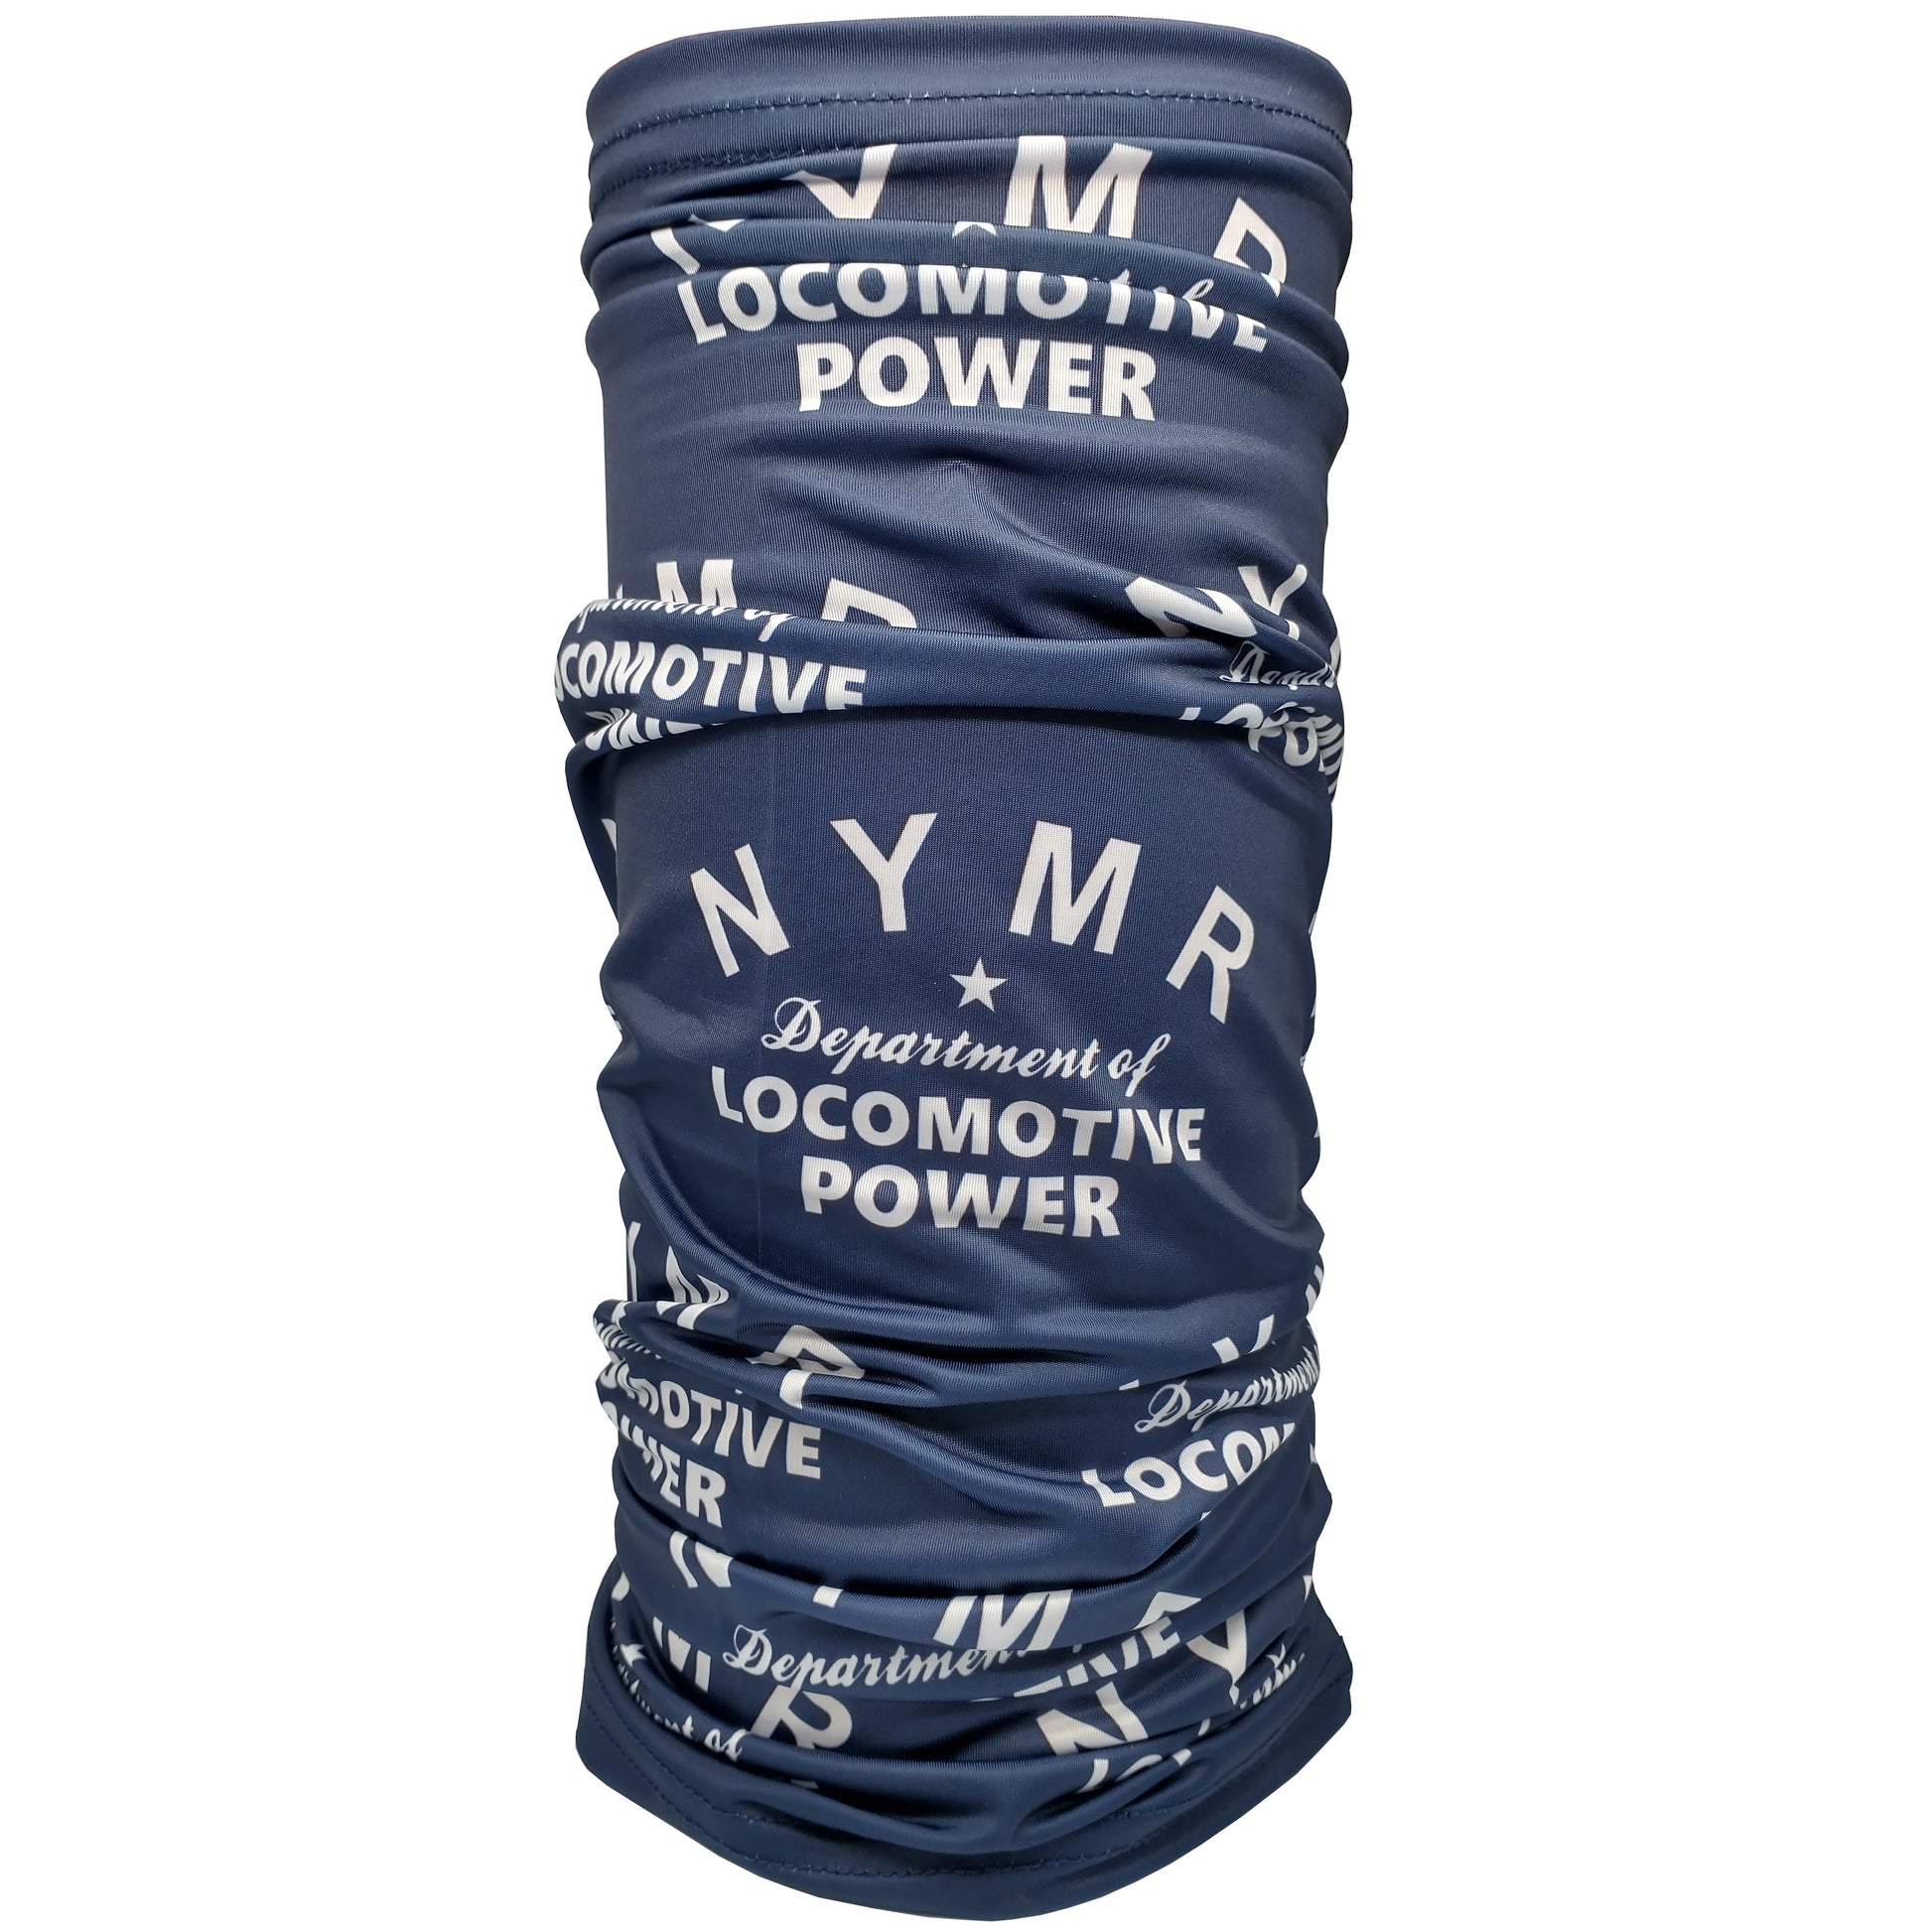 Blue neck warmer and/or face covering with N Y M R Locomotive Power logo repeatedly printed on it in white.